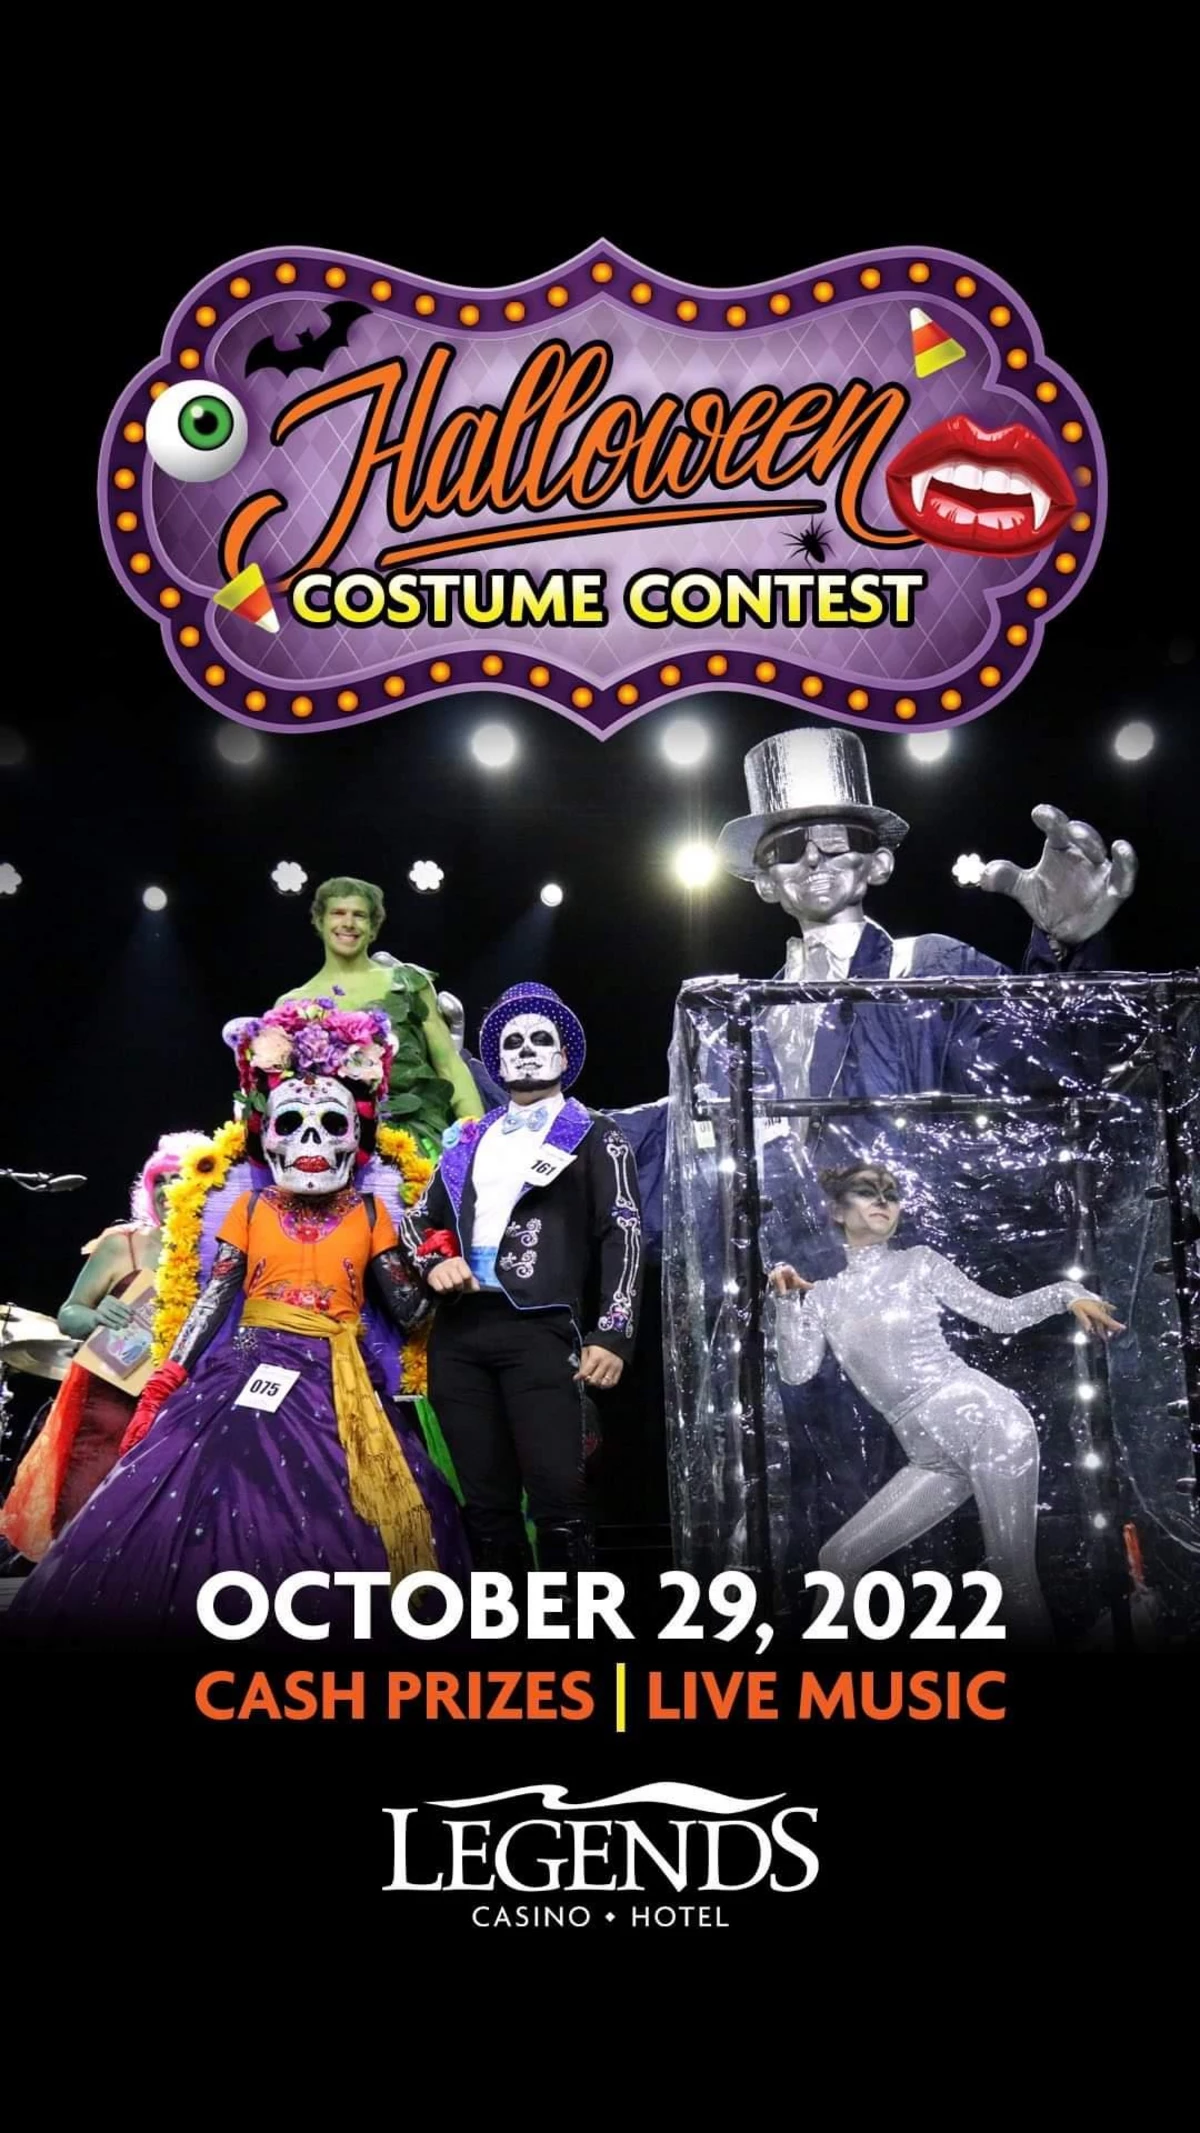 Join the Legends Casino Hotel Costume Contest 2022 with 5 Payouts